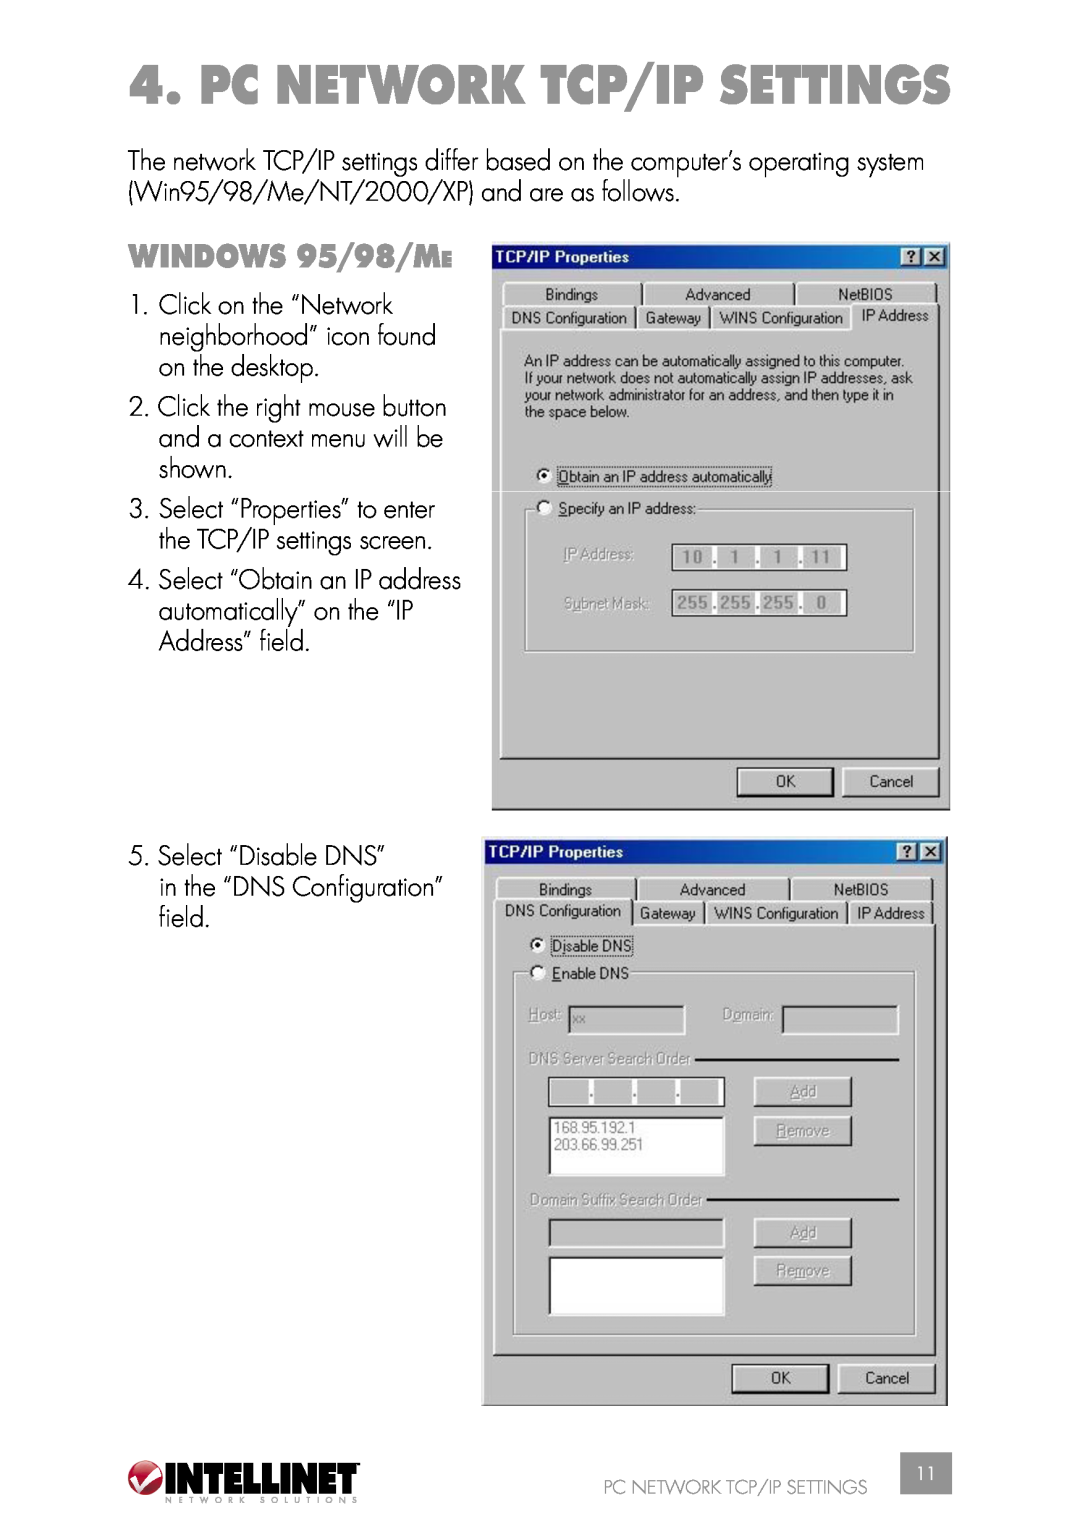 Intellinet Network Solutions 502566 manual Pc Network Tcp/Ip Settings, WINDOWS 95/98/ME 